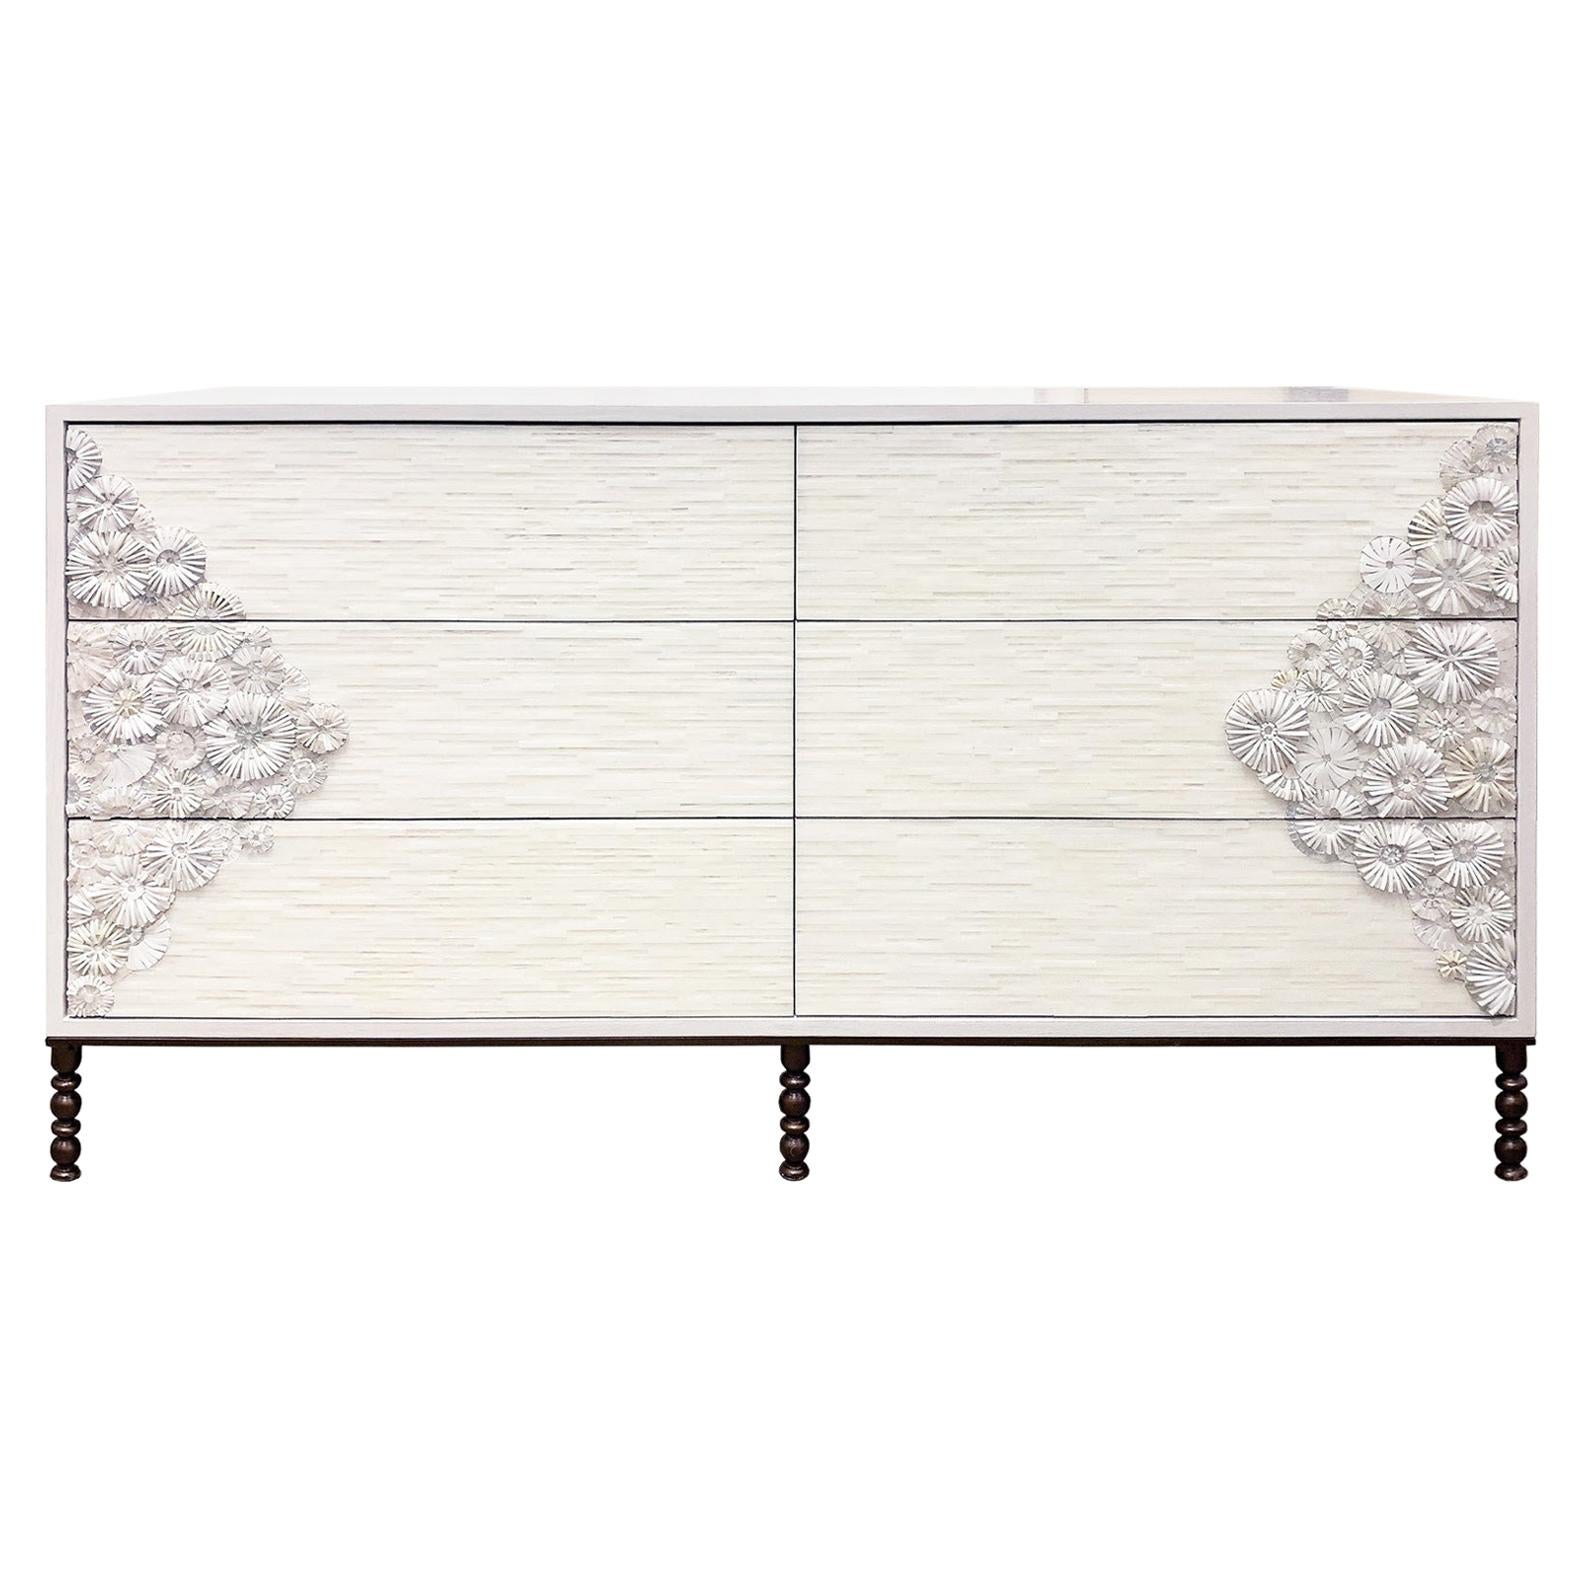 American Modern White Blossom Flower Glass Mosaic 9-Chest of Drawer by Ercole Home For Sale